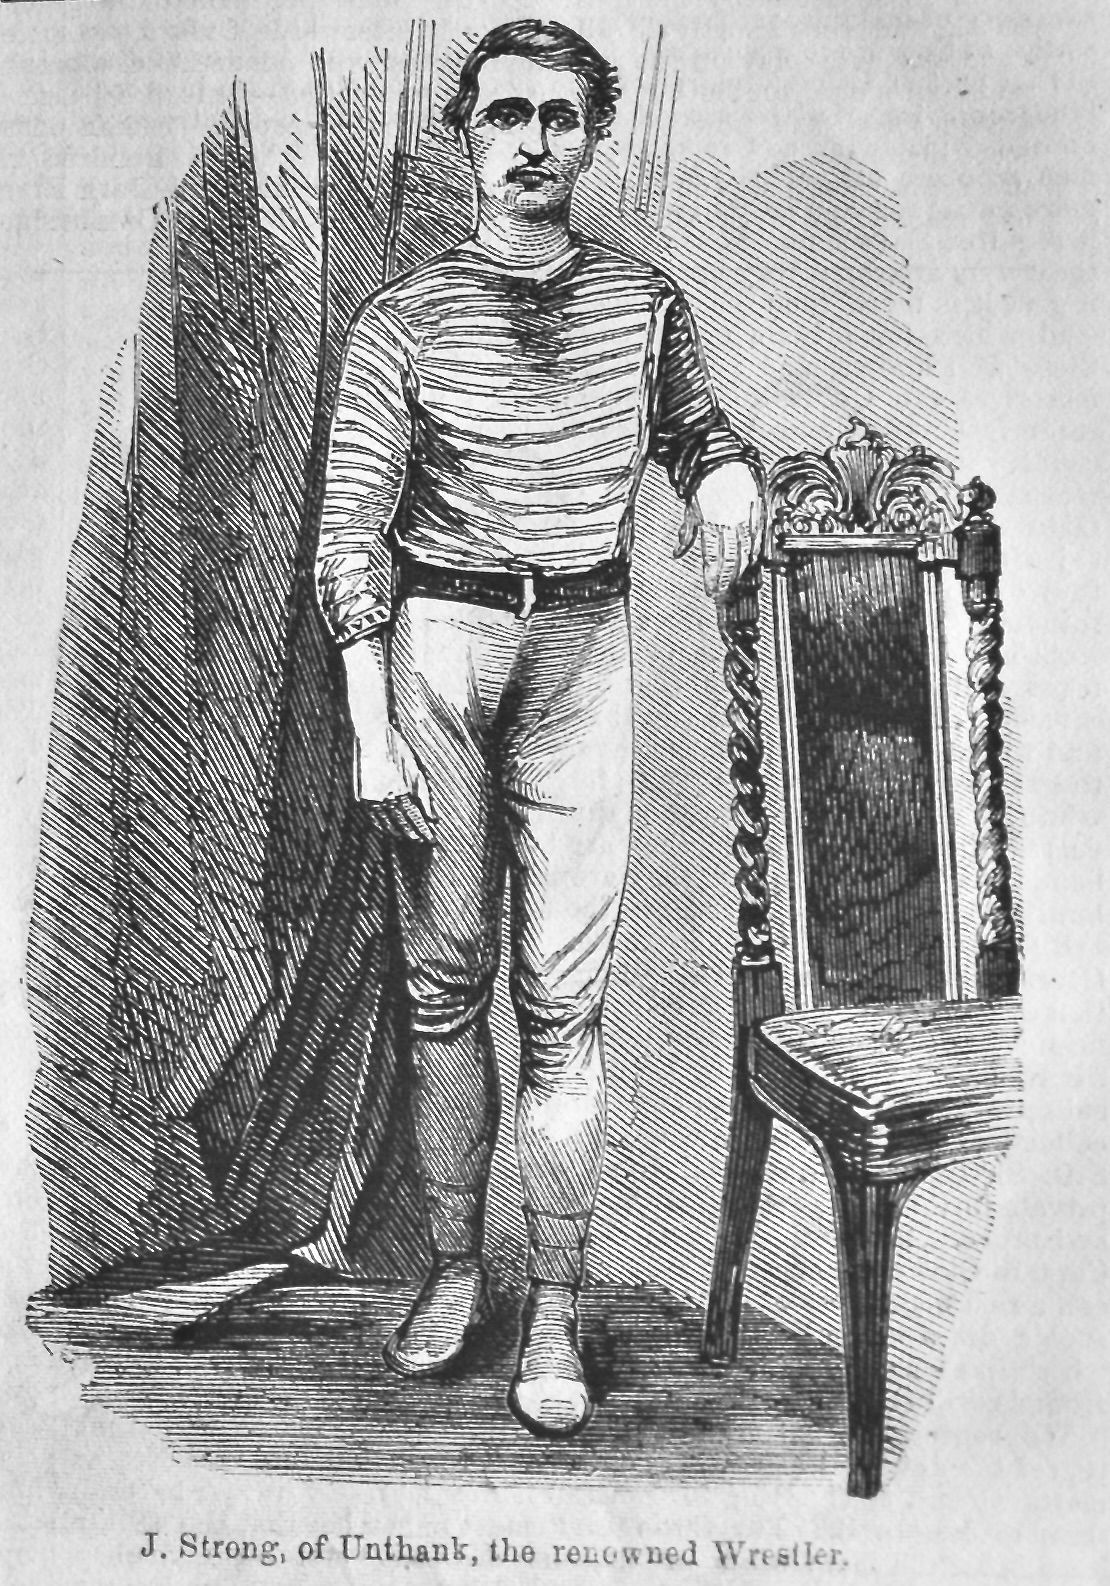 J. Strong, of Unthank, the renowned Wrestler.  1866.